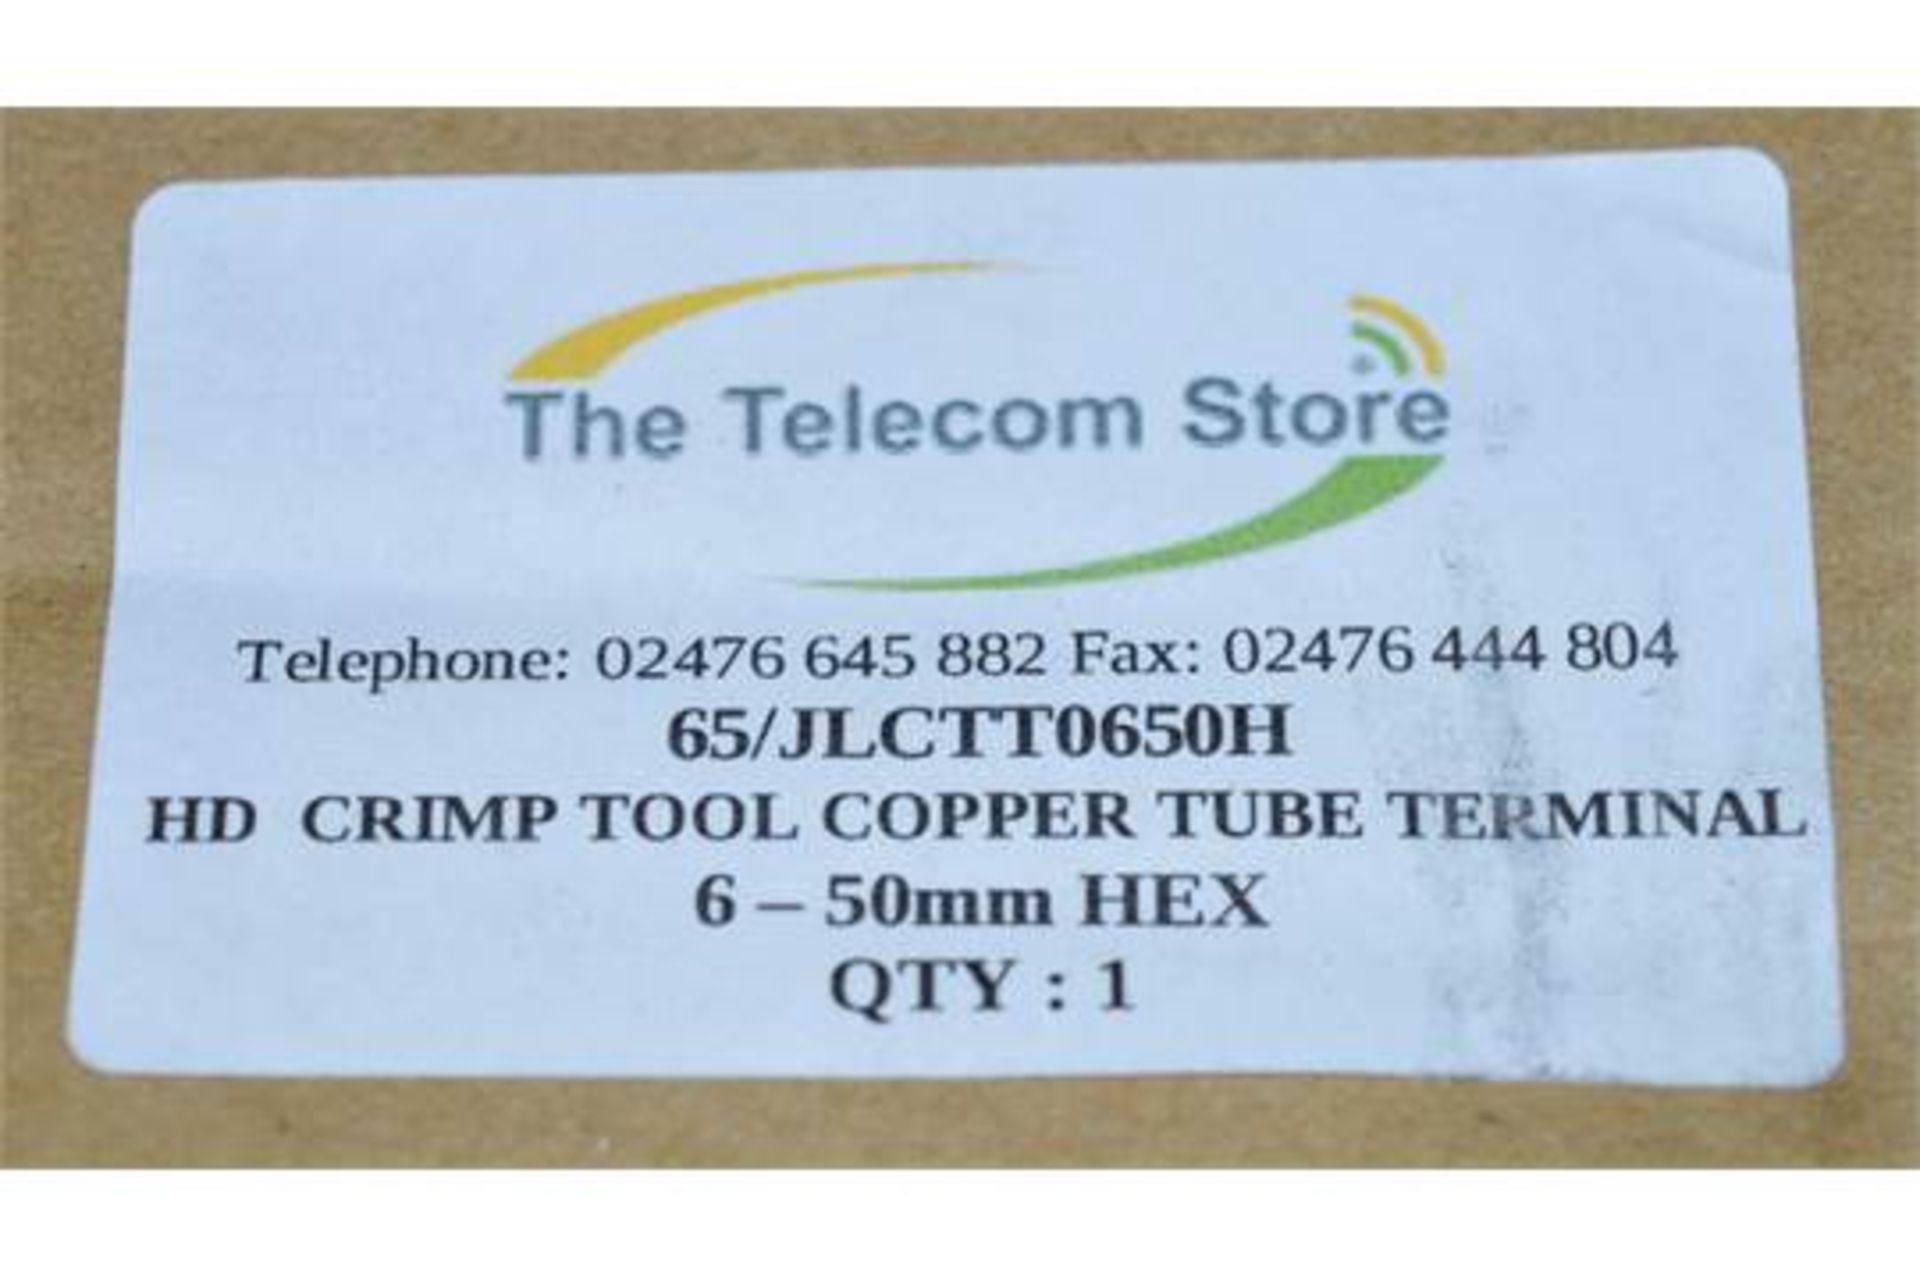 1 x HD Copper Tube Terminal Crimp Tool With Adjustable Hex - 38cm Length - XXX Branded - New and - Image 2 of 3